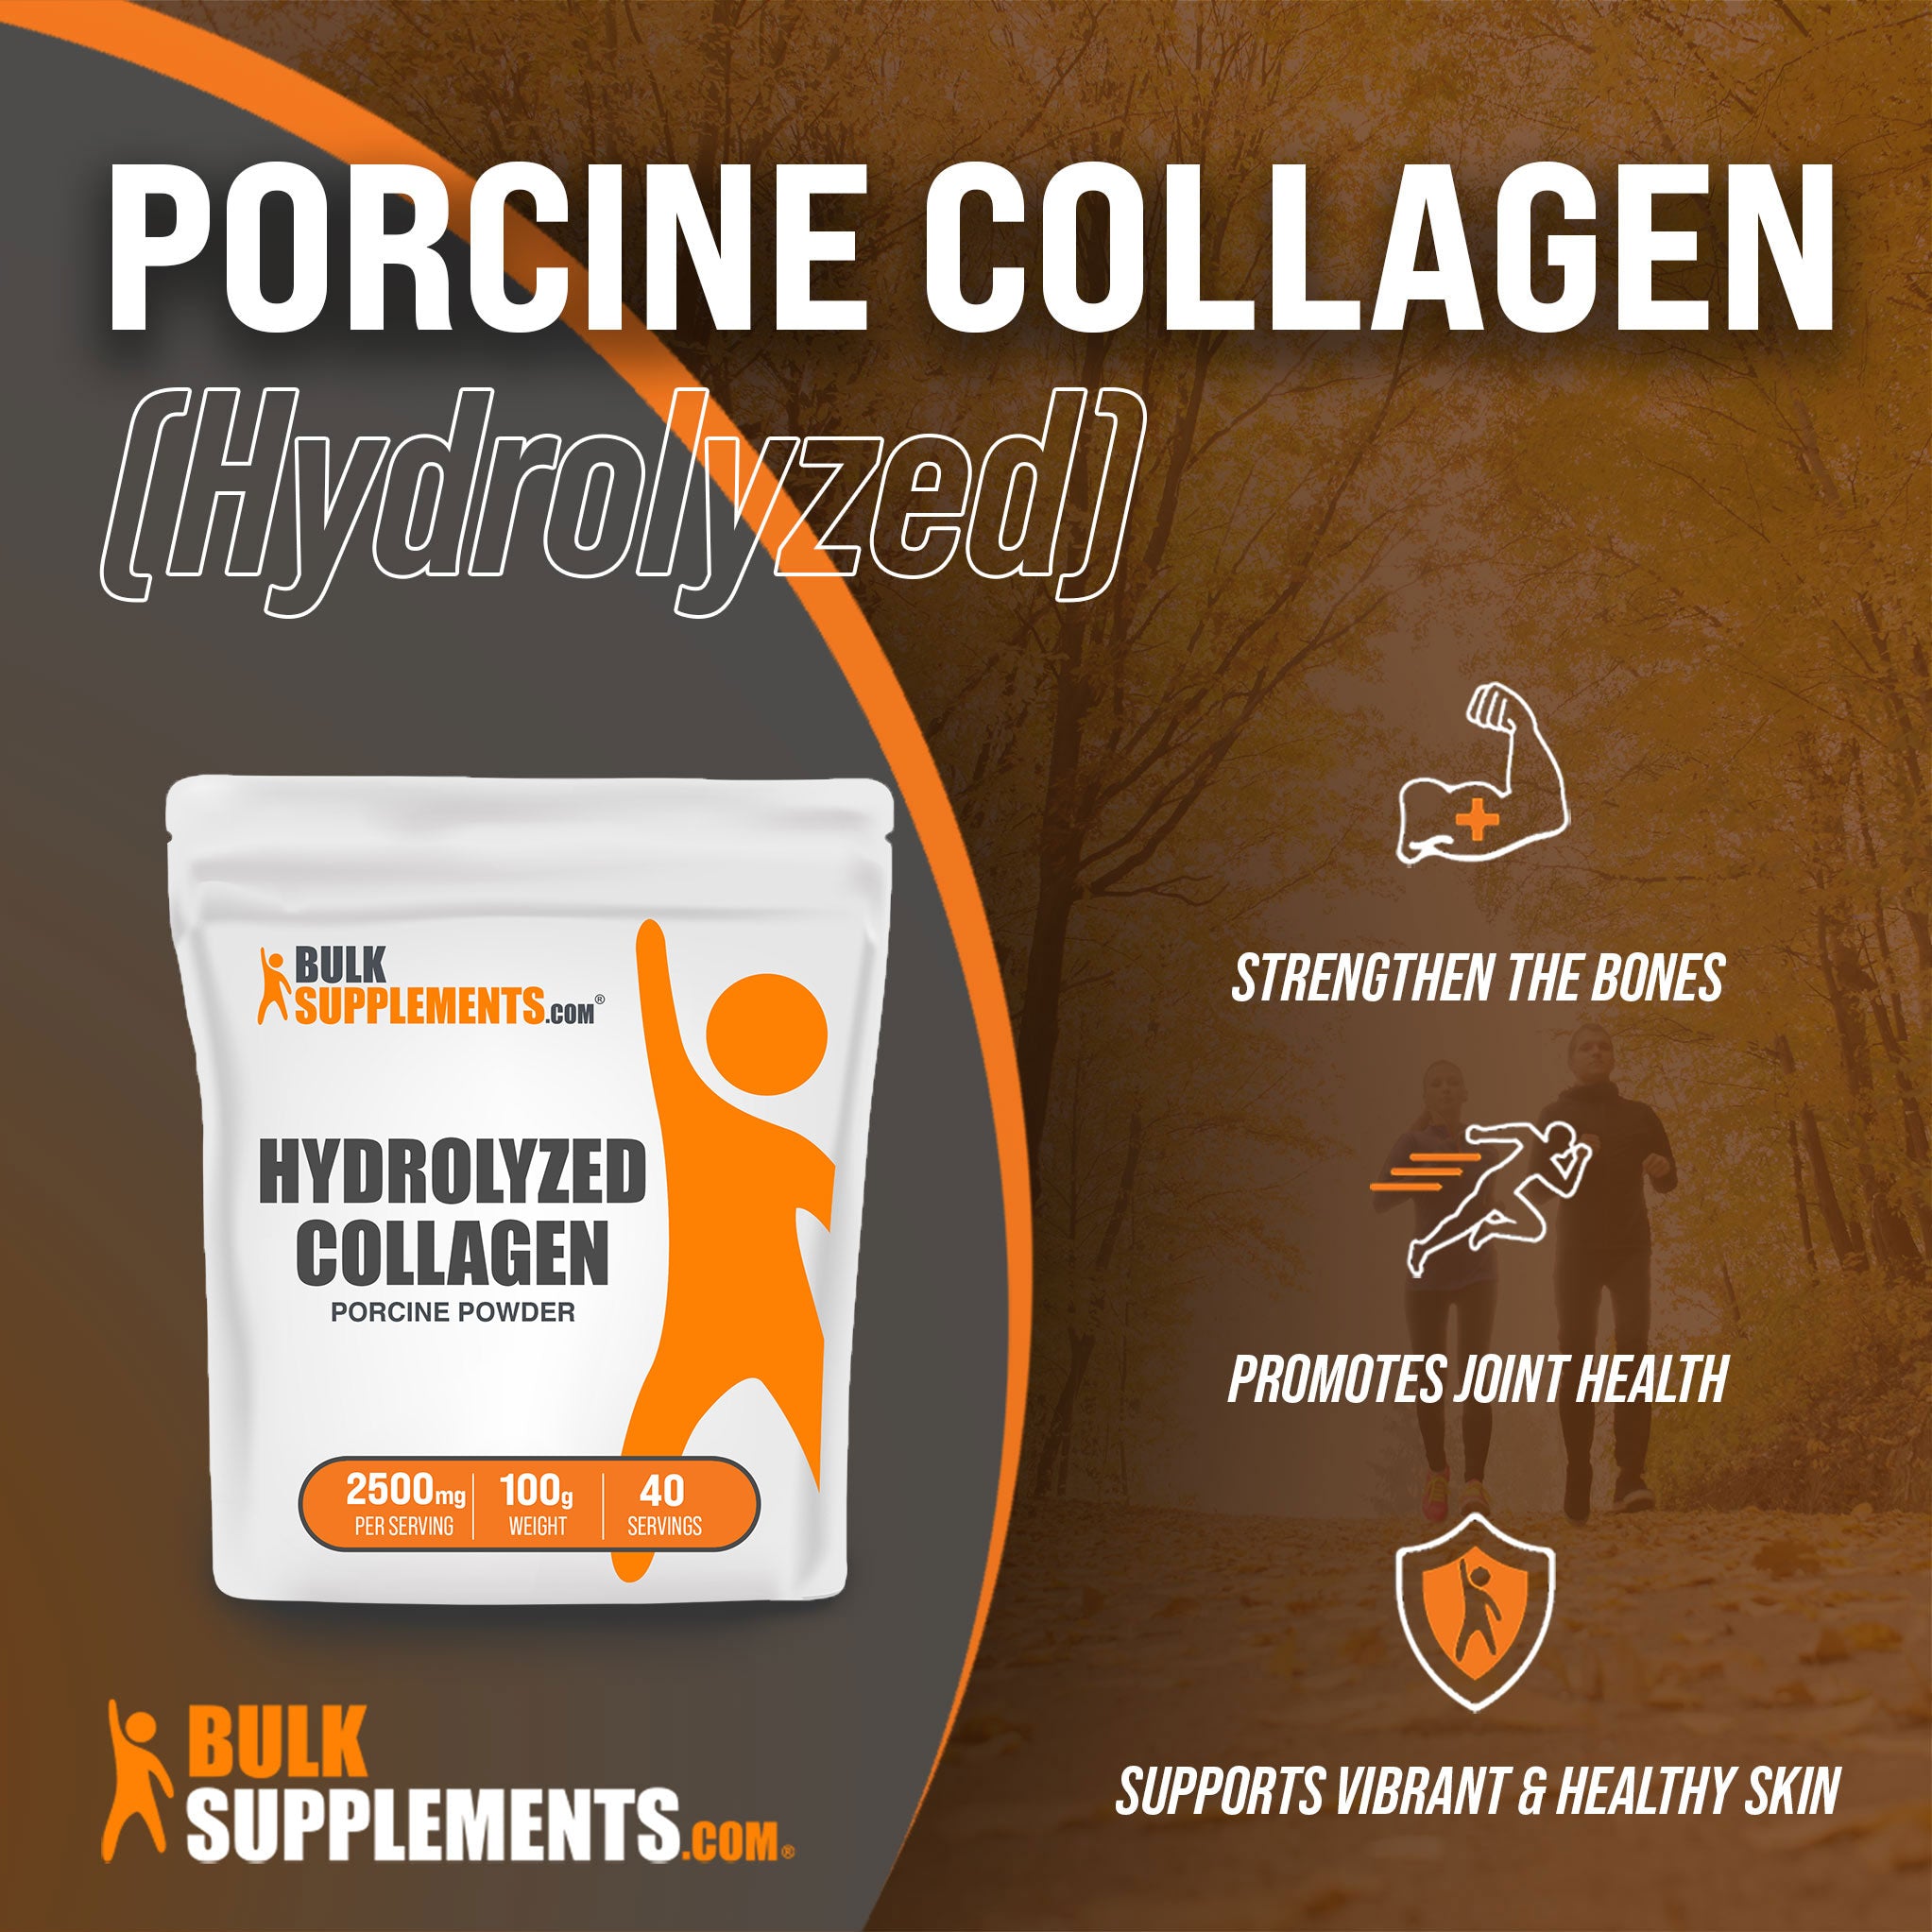 Benefits of Porcine Collagen Hydrolyzed; strengthen the bones, promotes joint health, supports vibrant and healthy skin